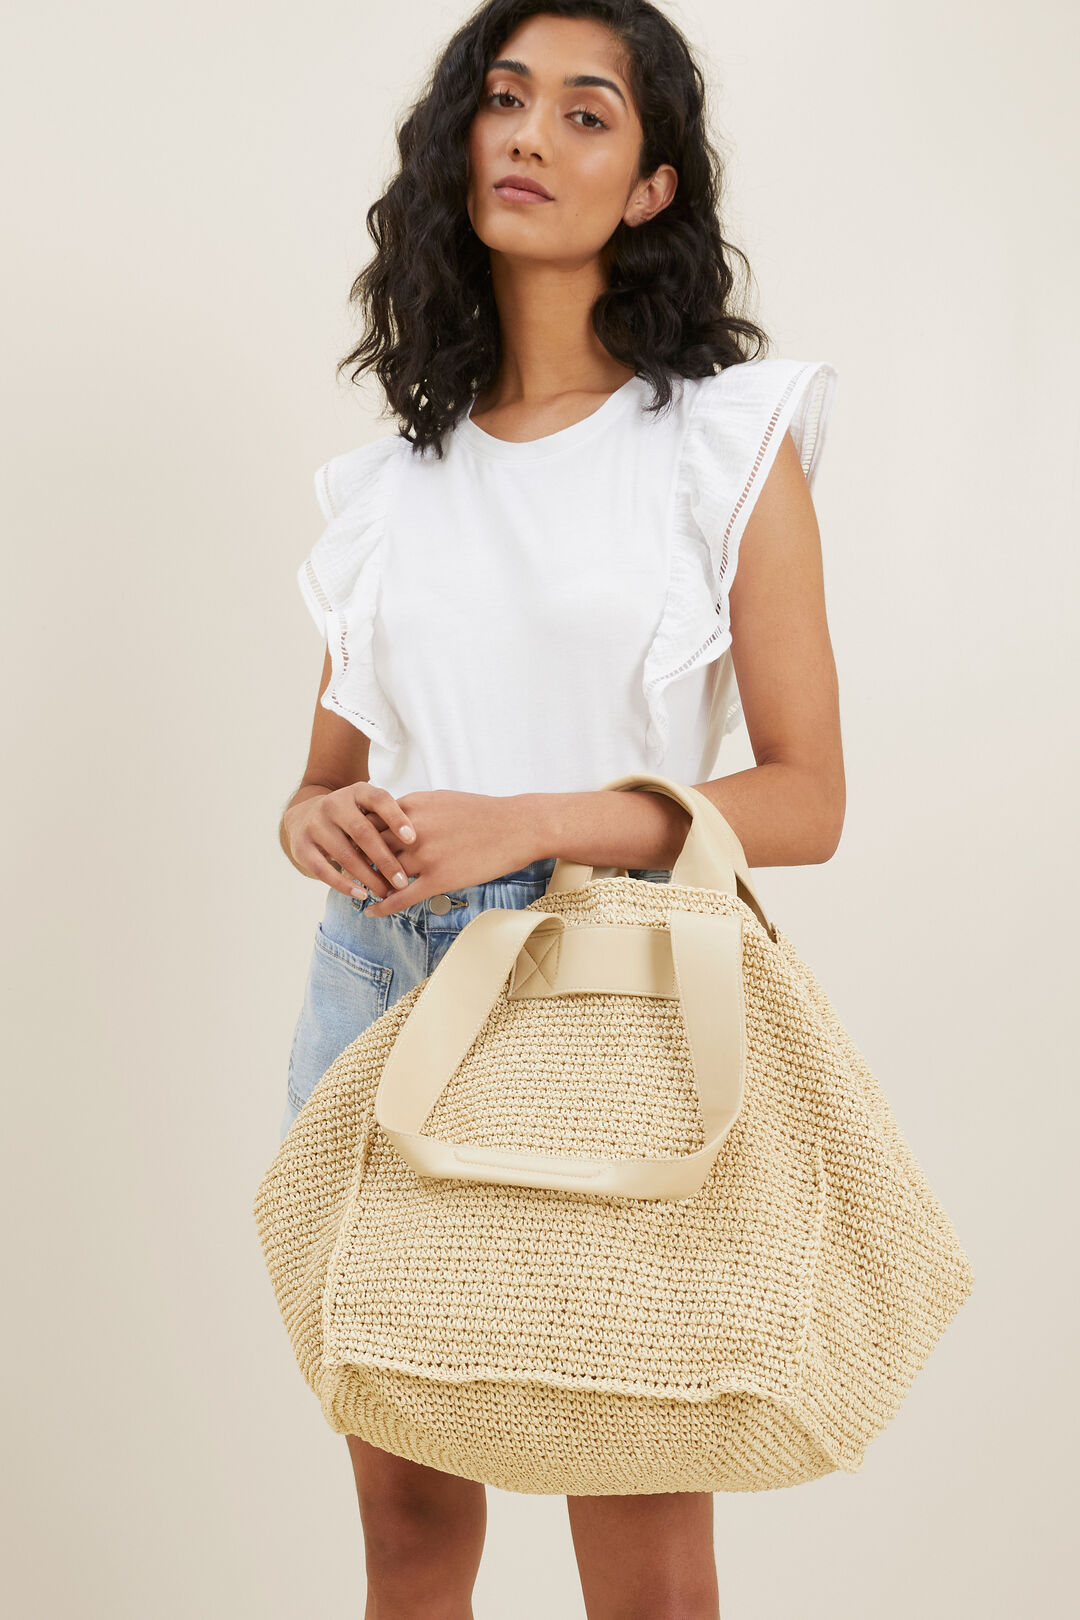 Straw Carry All Tote  Natural  hi-res